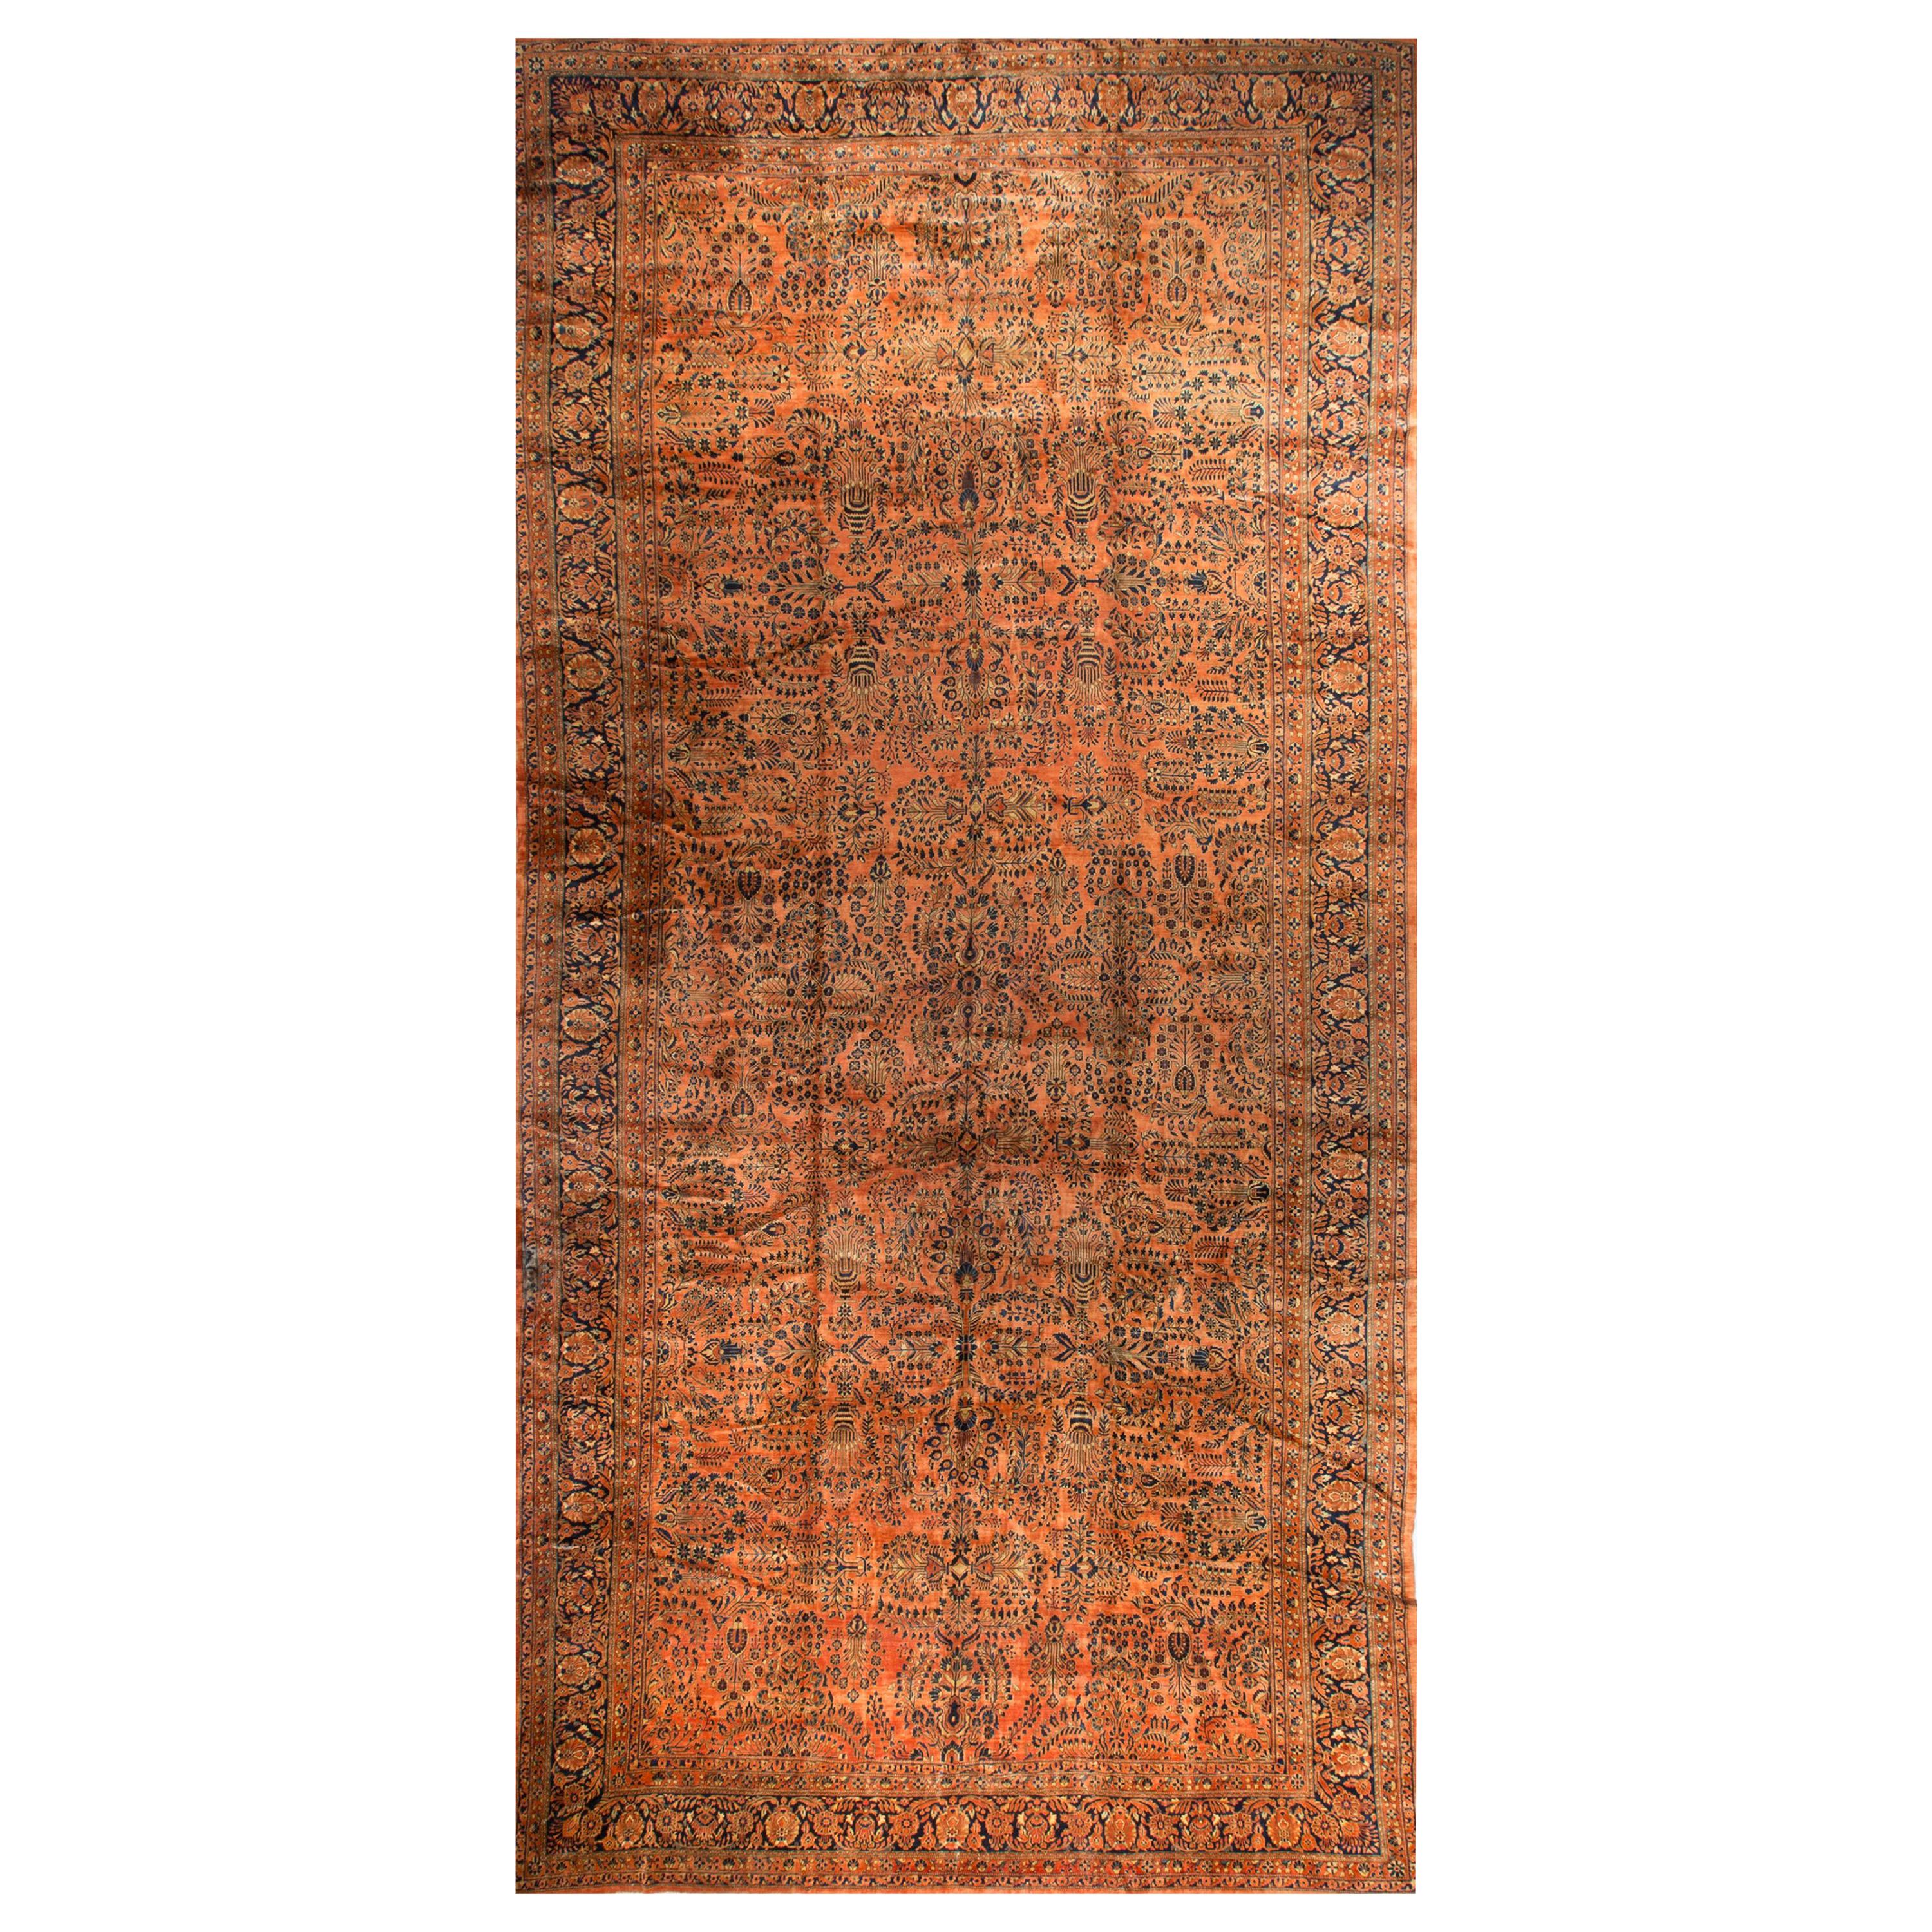 Vintage Oversize Persian Sarouk Rug Gallery Size, circa 1930 For Sale